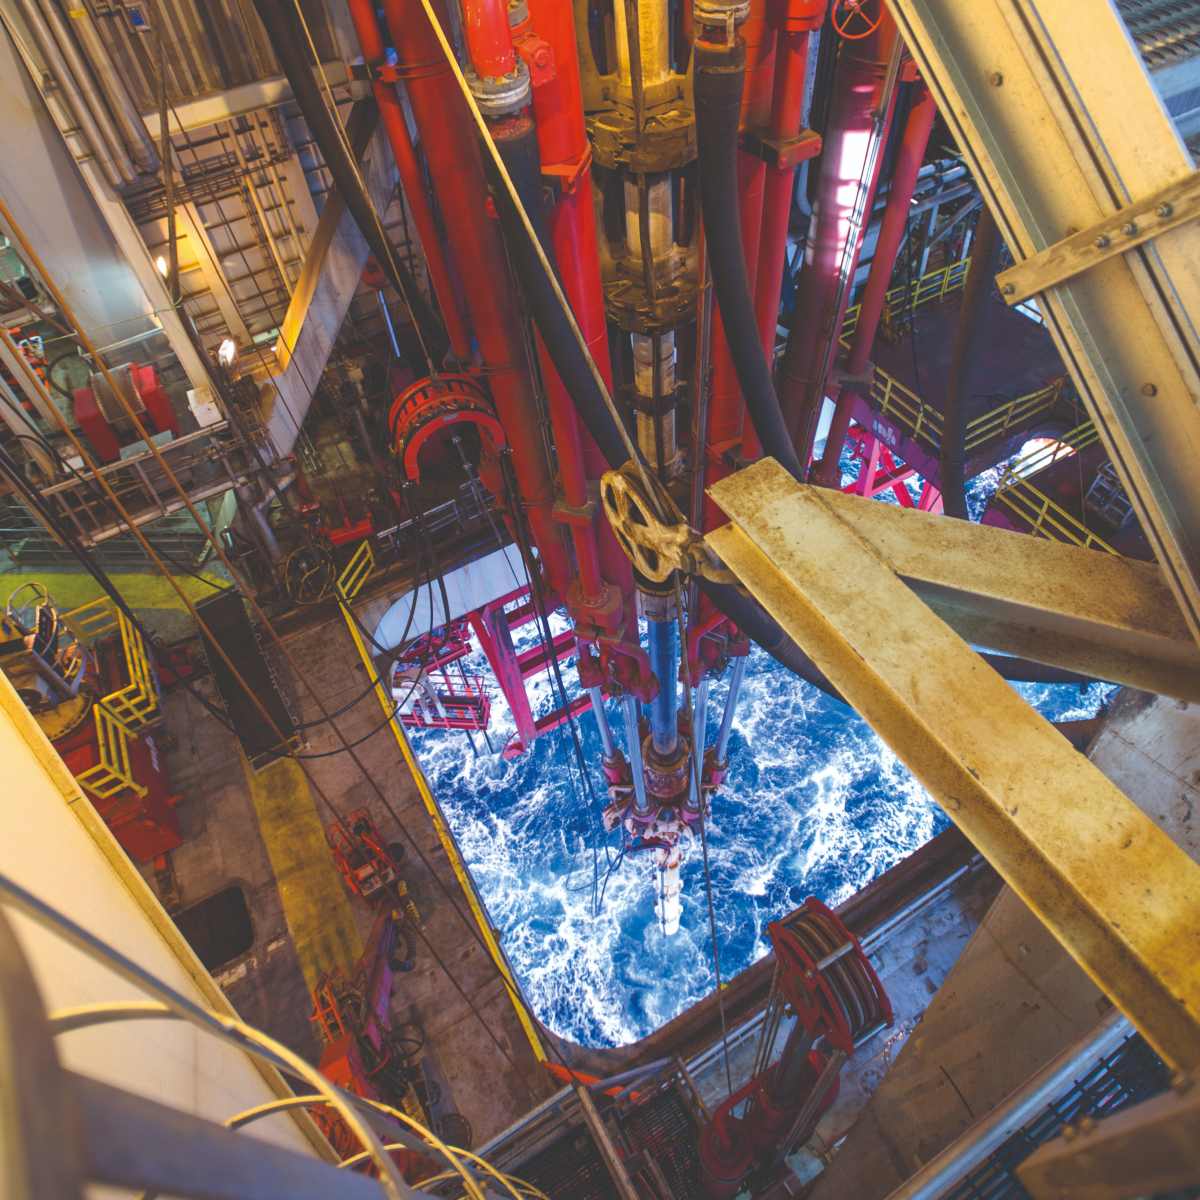 Inside view of an oil rig.